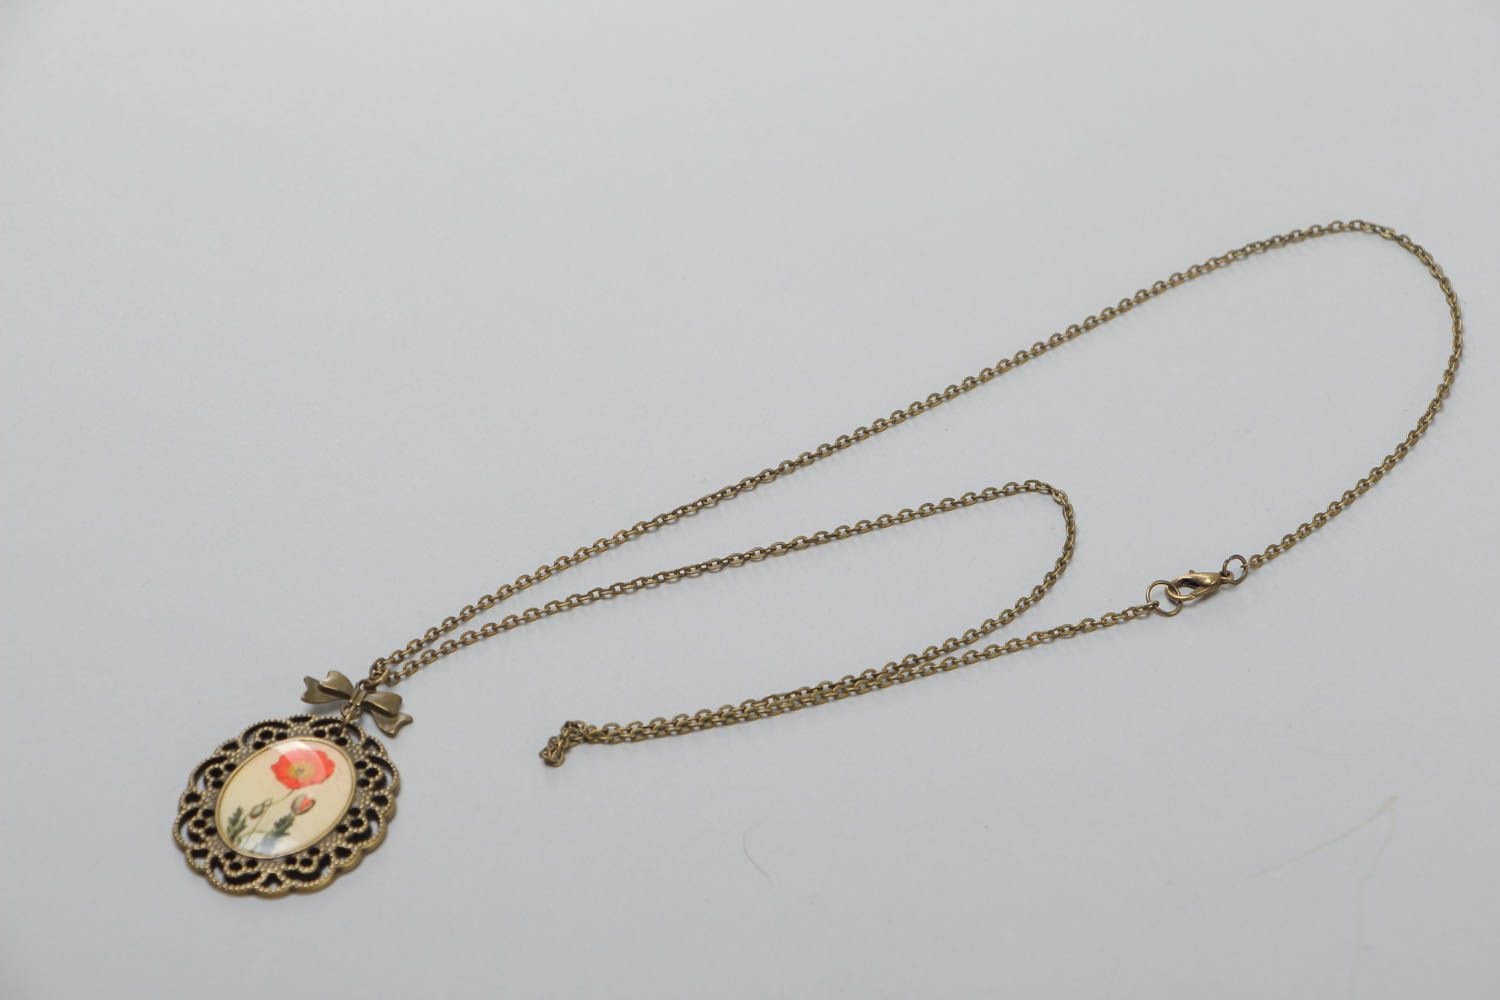 Handmade metal pendant necklace with flower image coated with glass glaze on chain photo 2